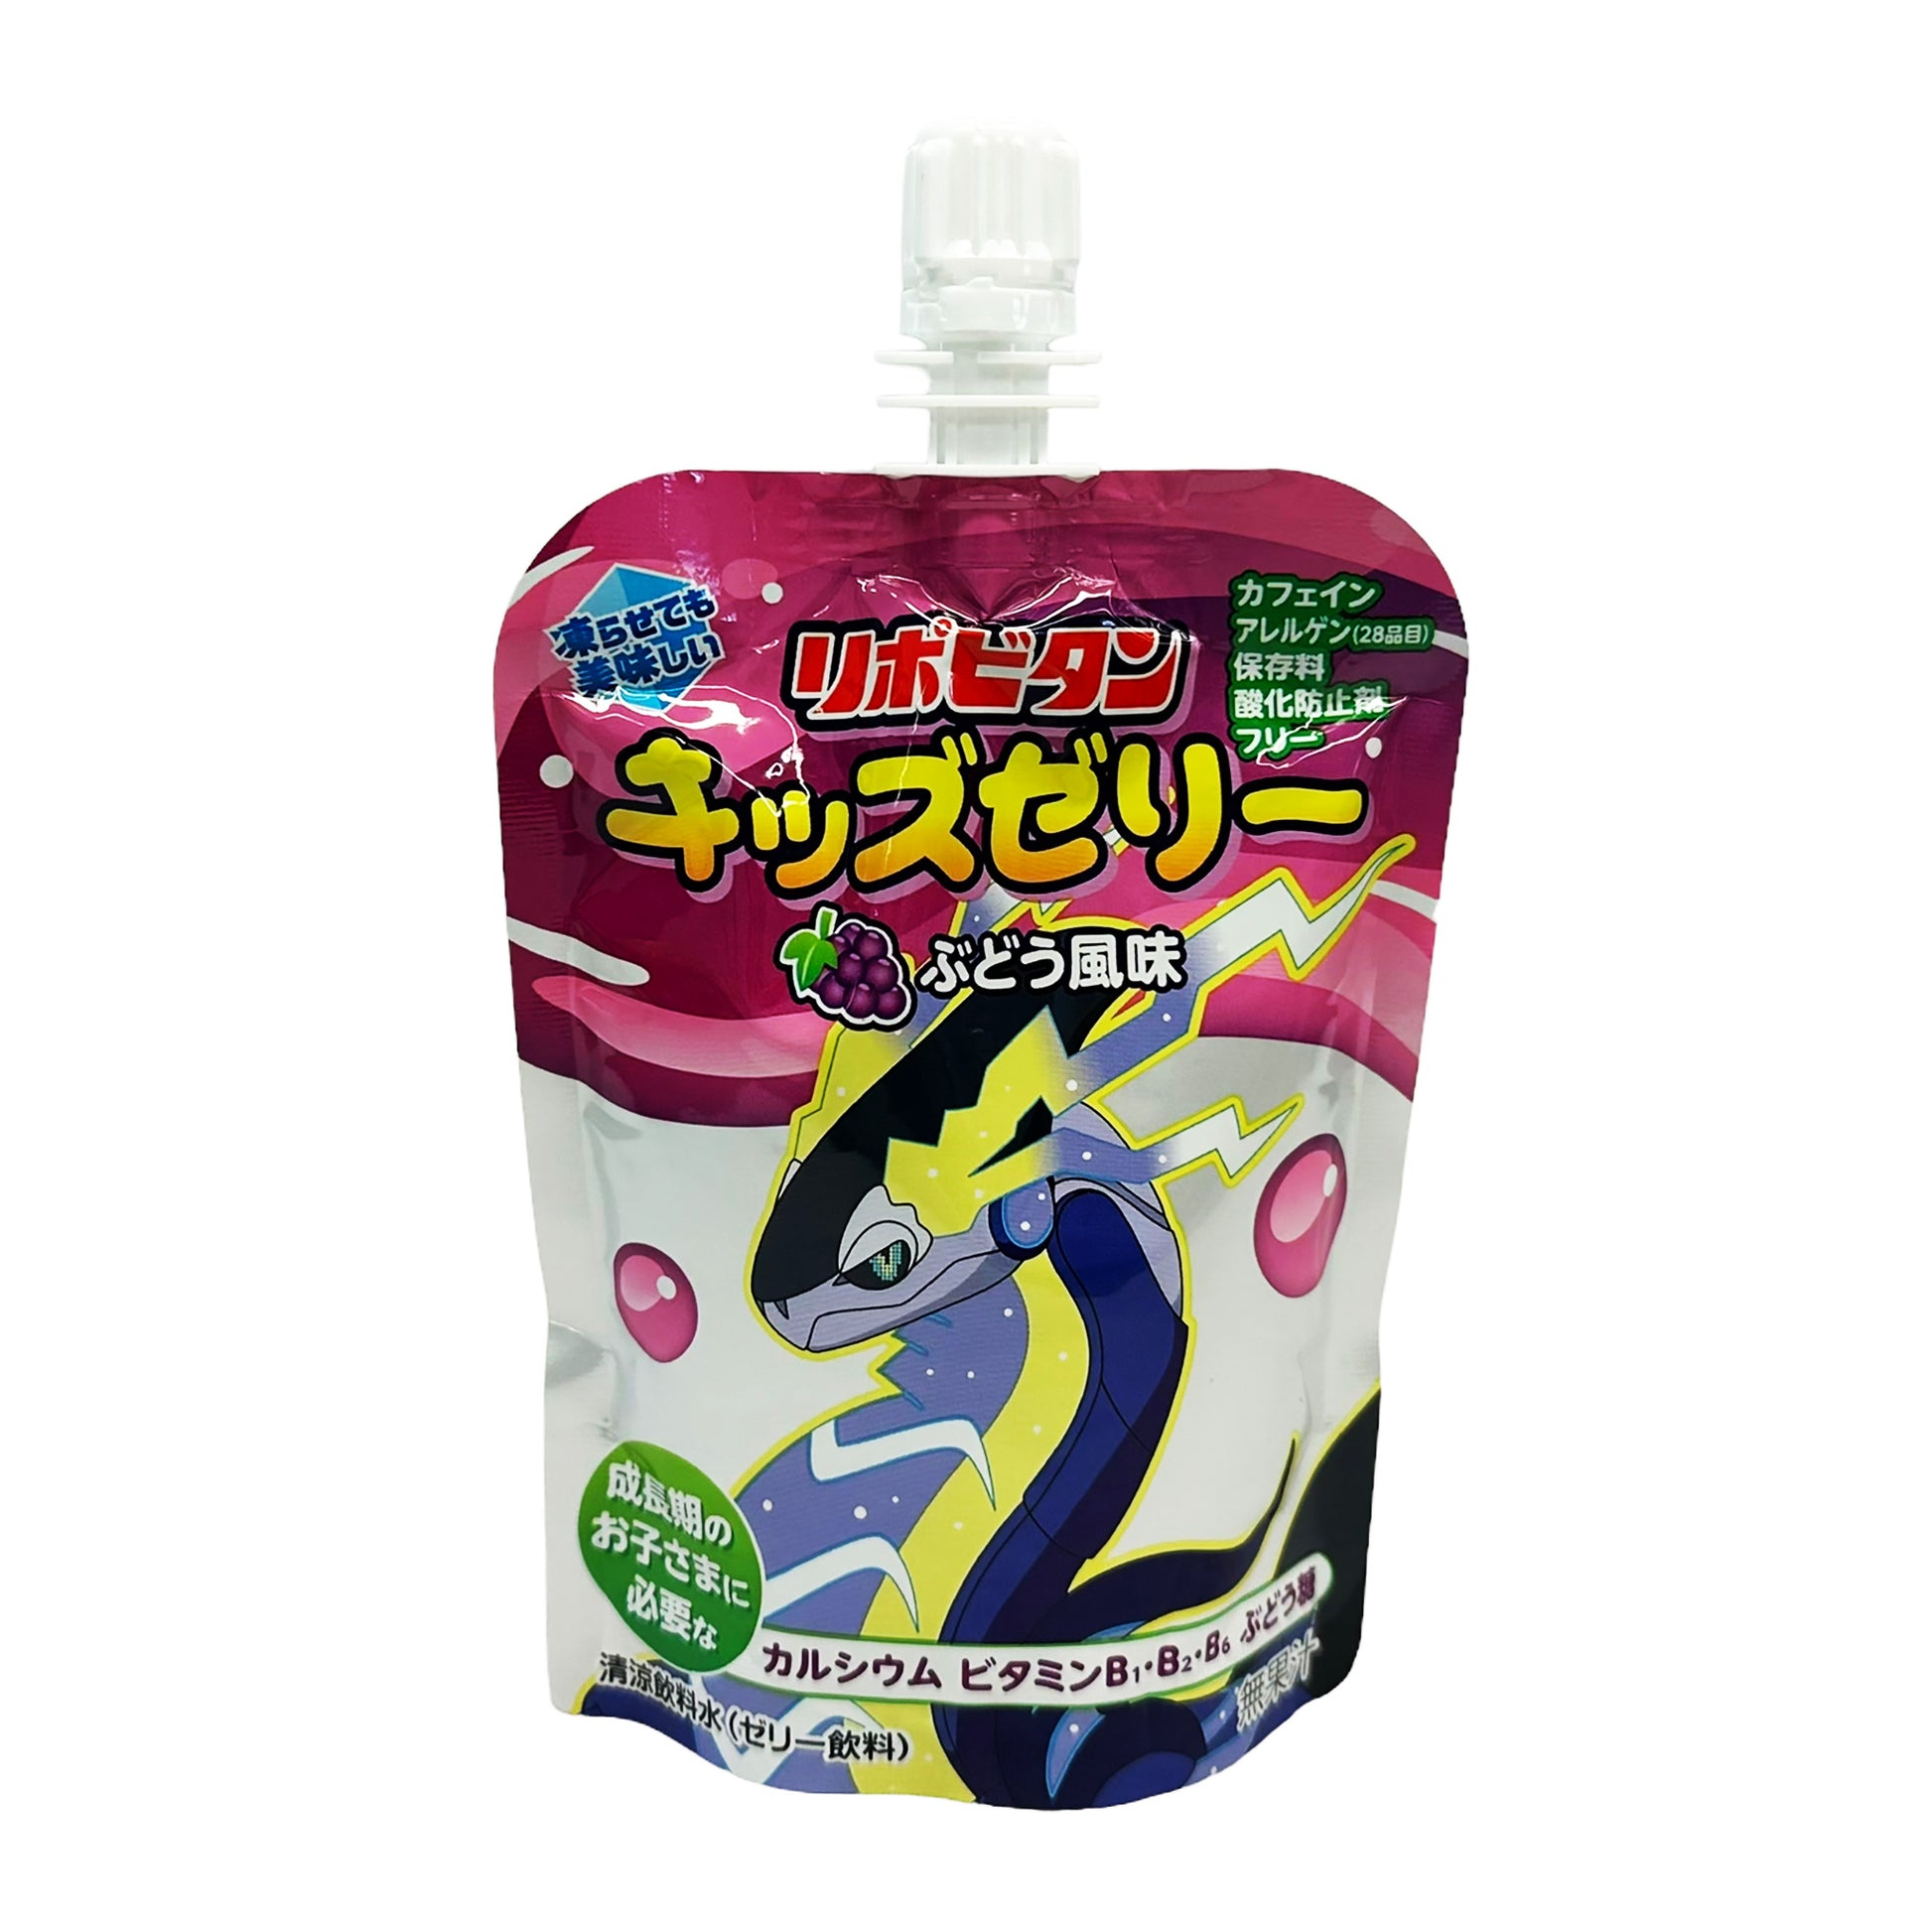 Front graphic image 5 of Taisho Pokemon Jelly Drink - Grape 4.4oz (125g)